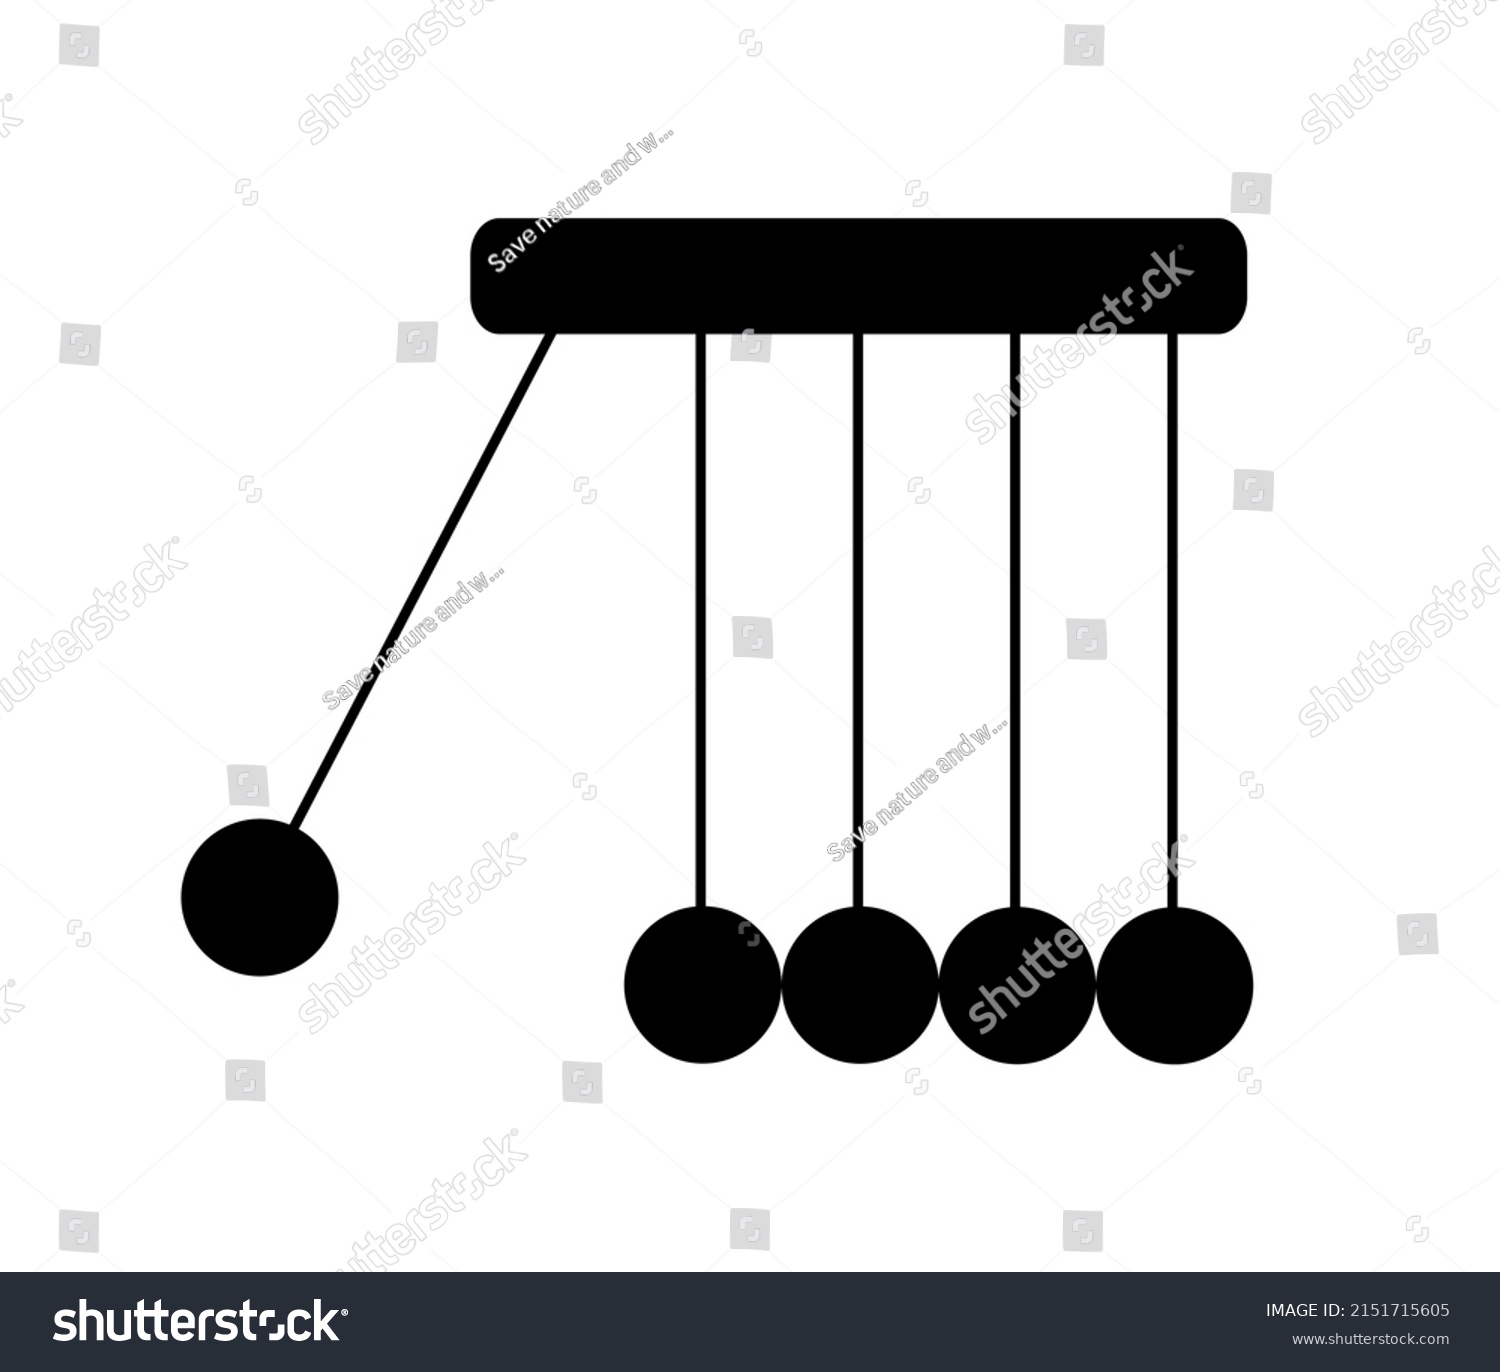 Newtons Cradle Symbol Vector Silhouette Illustration Stock Vector Royalty Free 2151715605 5248